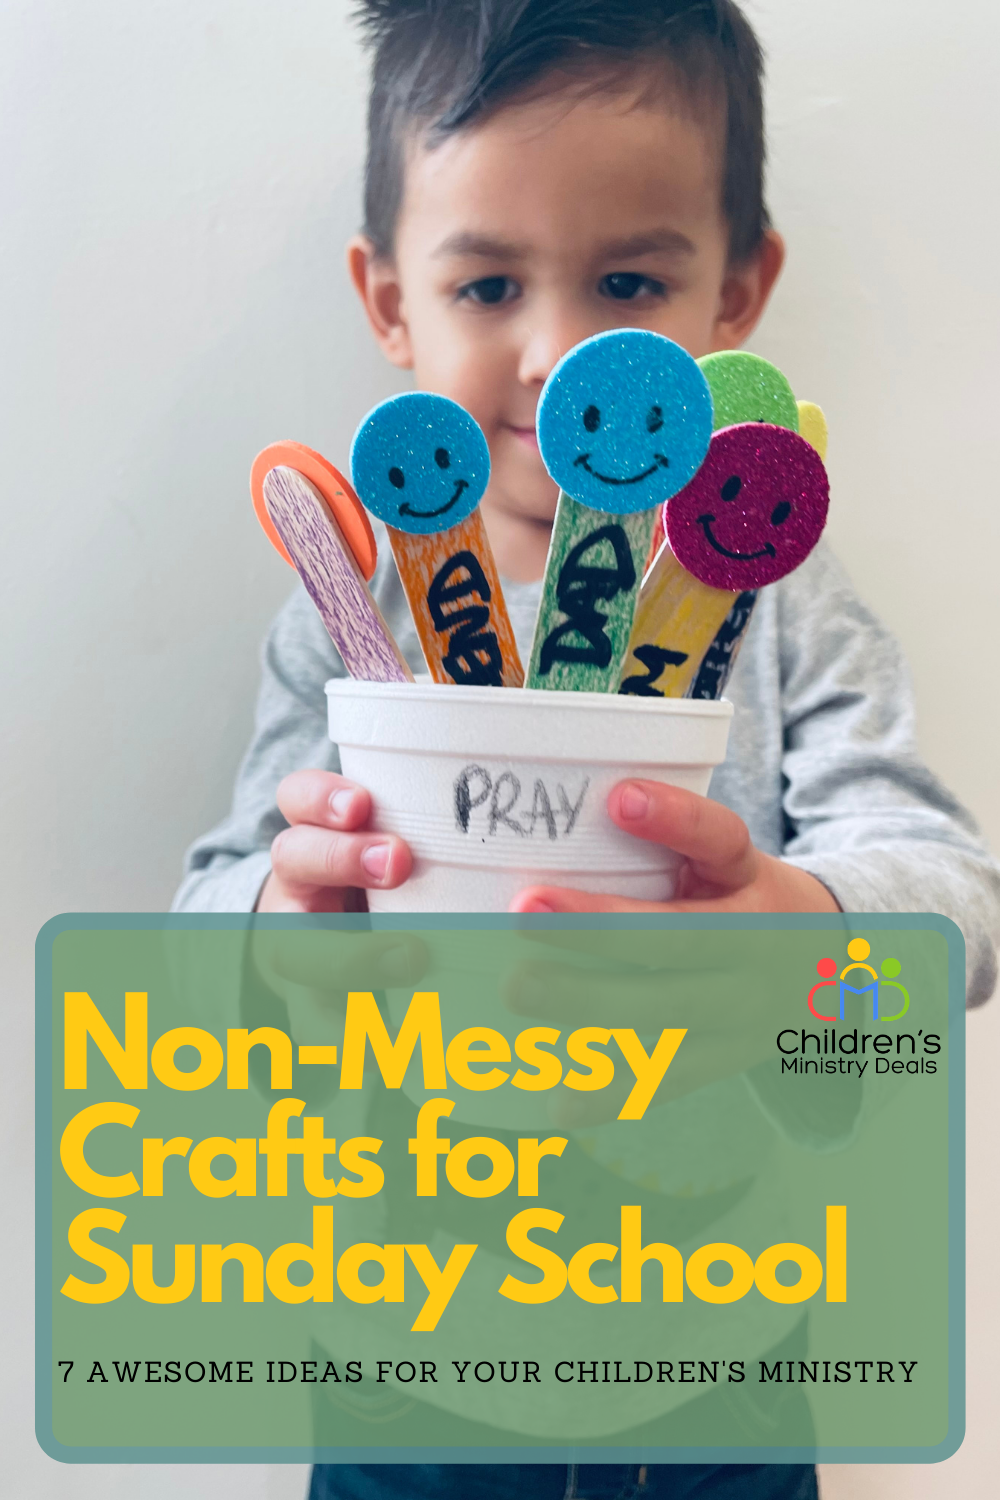 FREE Bible Crafts For Kids - Fun & Easy Bible Craft Ideas – SupplyMe